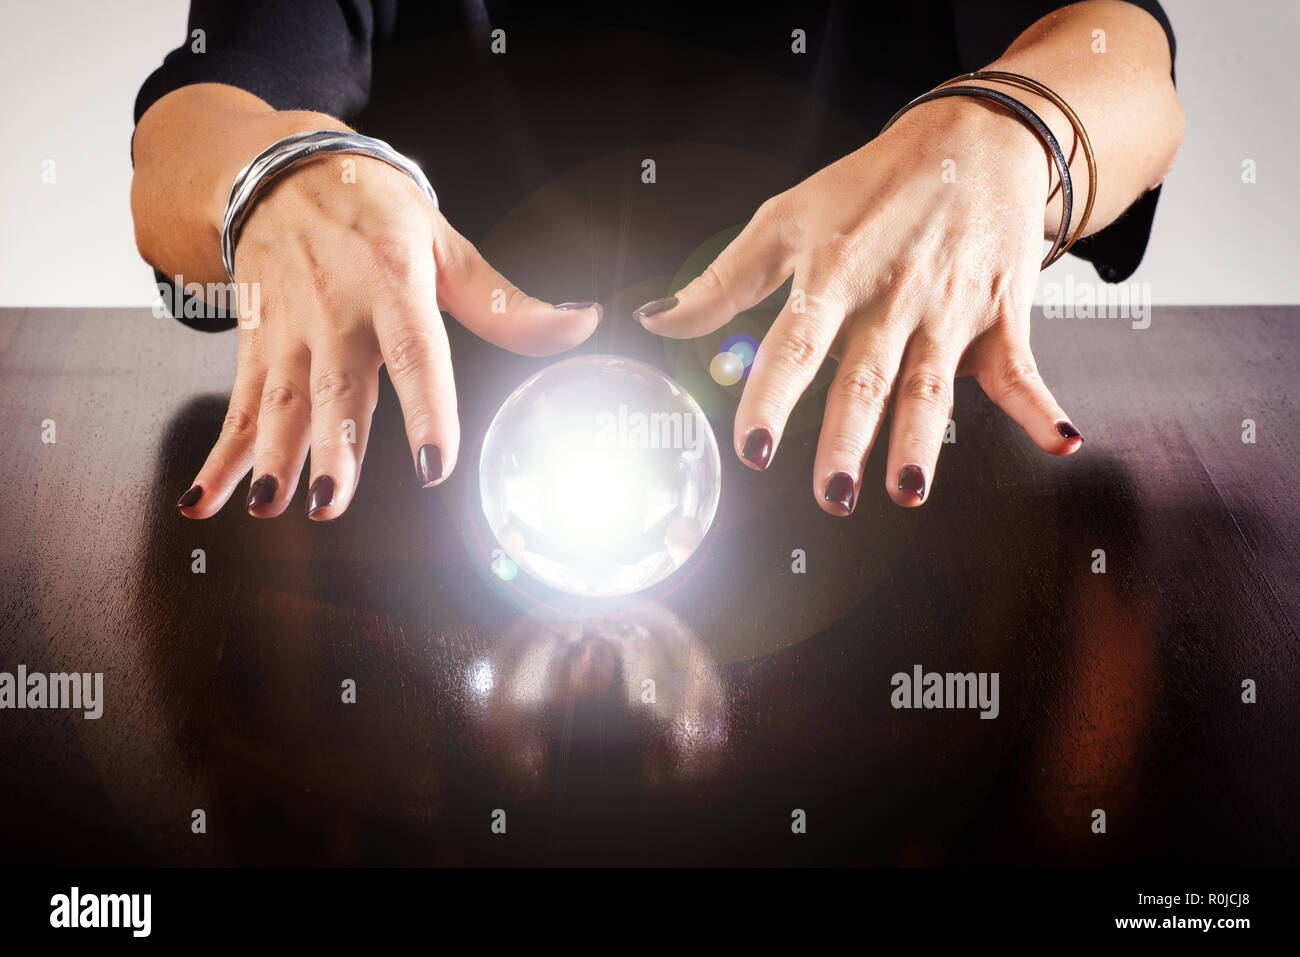 Fortune teller or soothsayer with a glowing crystal ball or sphere reflected on a shiny wooden table in a close up view of her hands Stock Photo